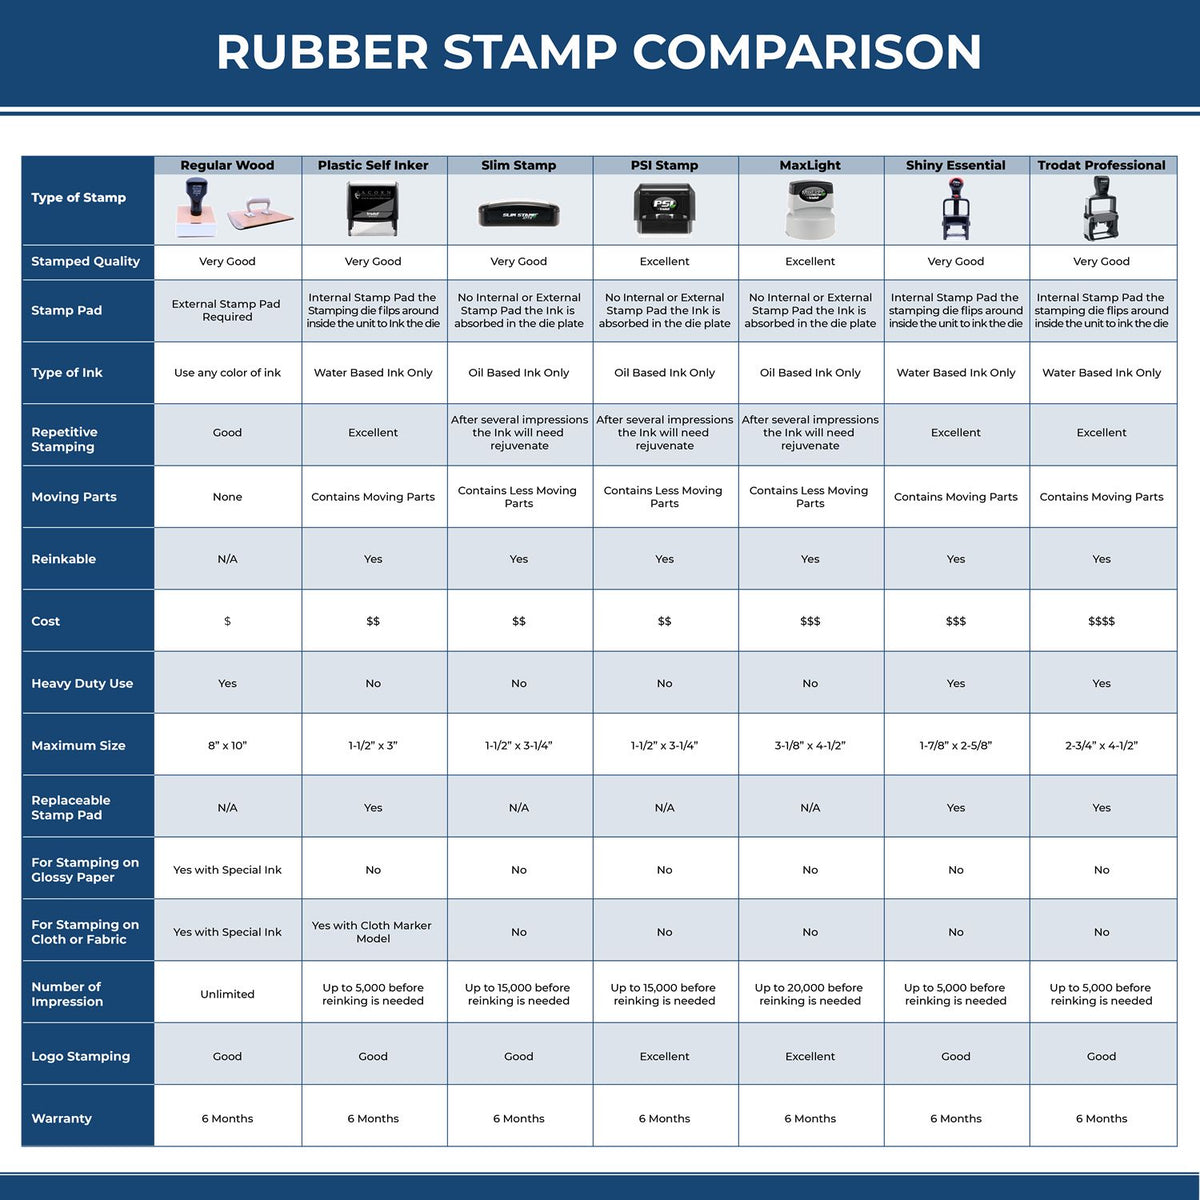 A comparison chart for the different types of mount models available for the Wooden Handle Guam Rectangular Notary Public Stamp.